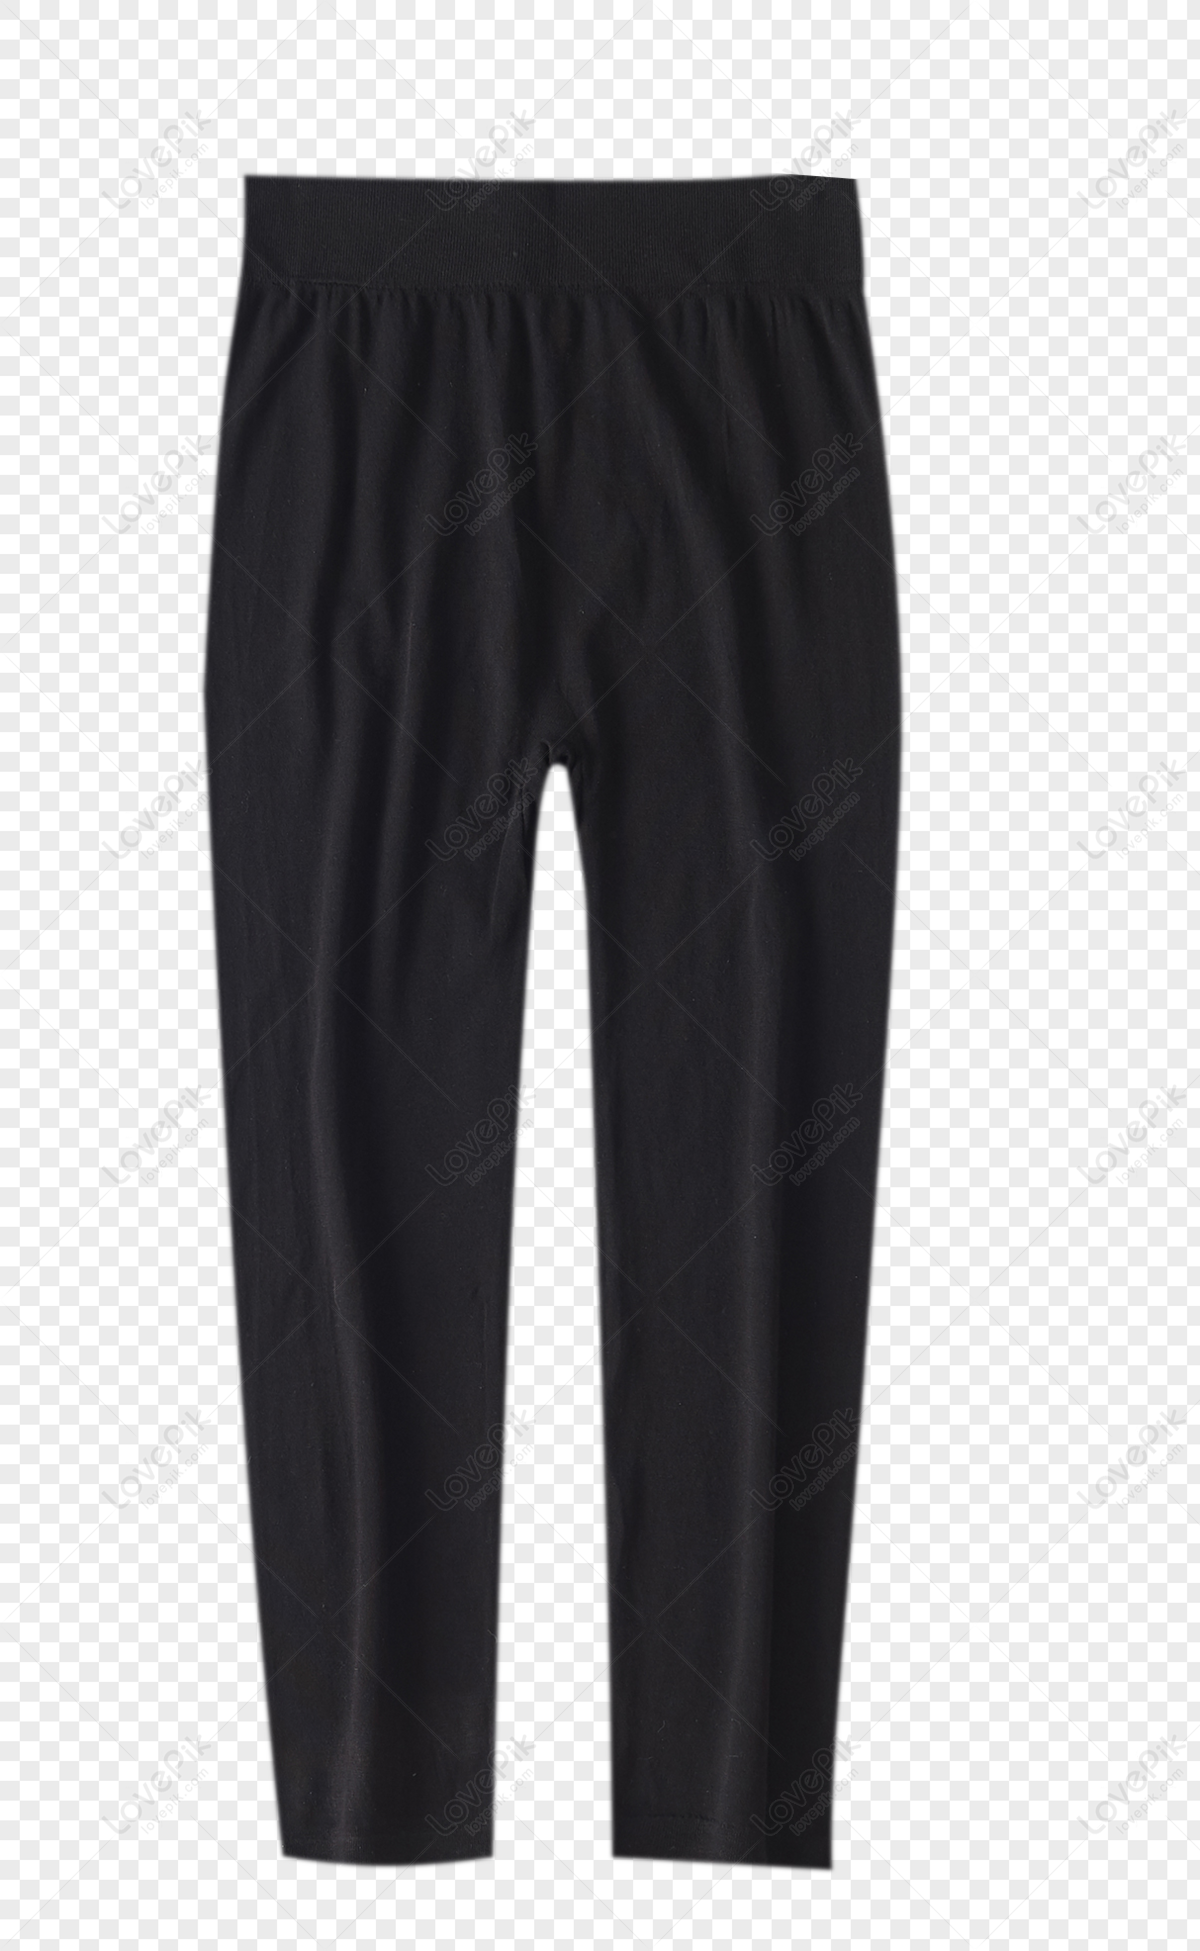 Black Pants PNG Images With Transparent Background